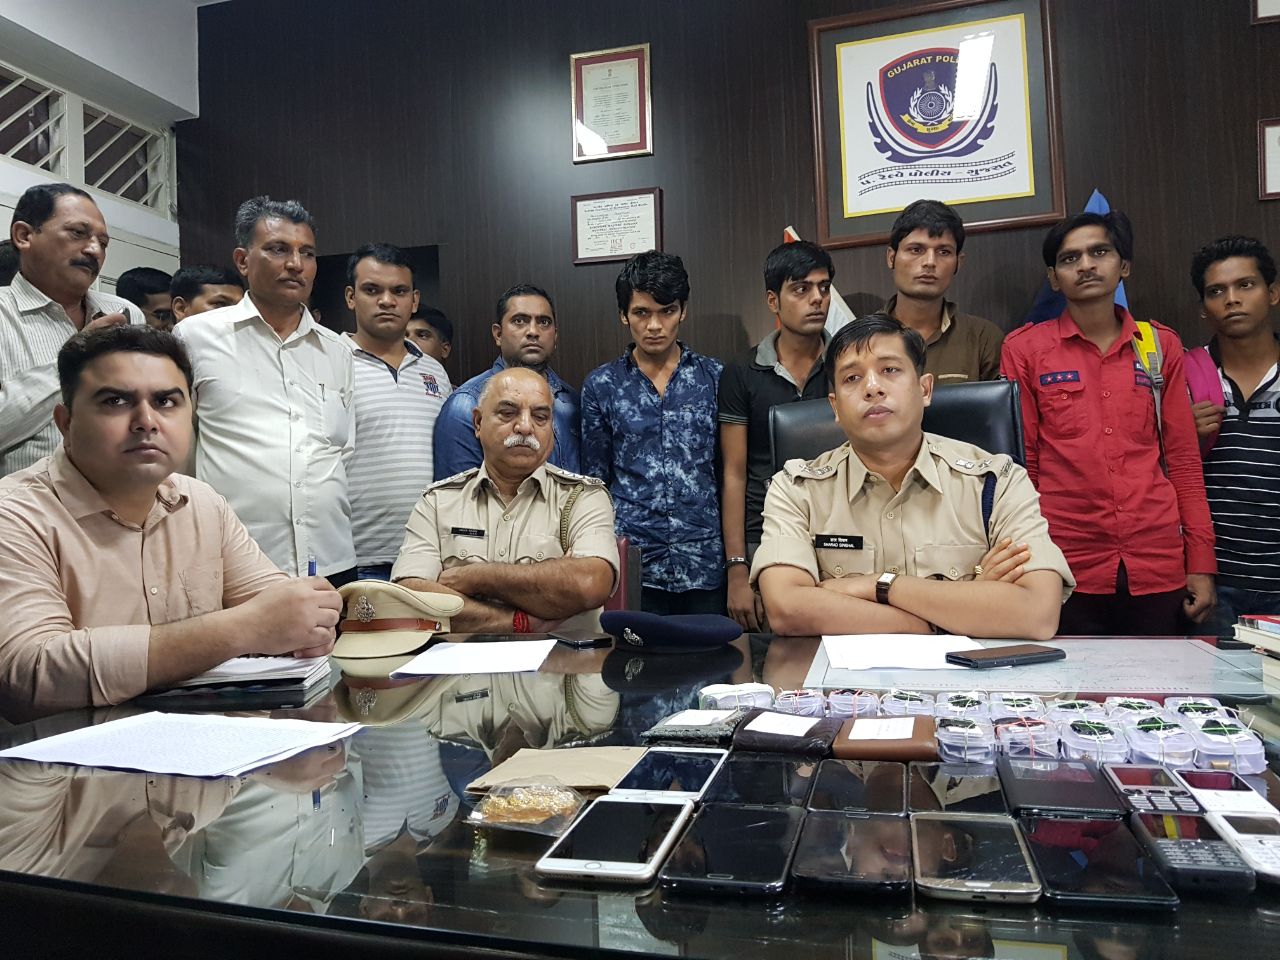 Bag lifter and pick pocketing gang busted by Gujarat Railway Police